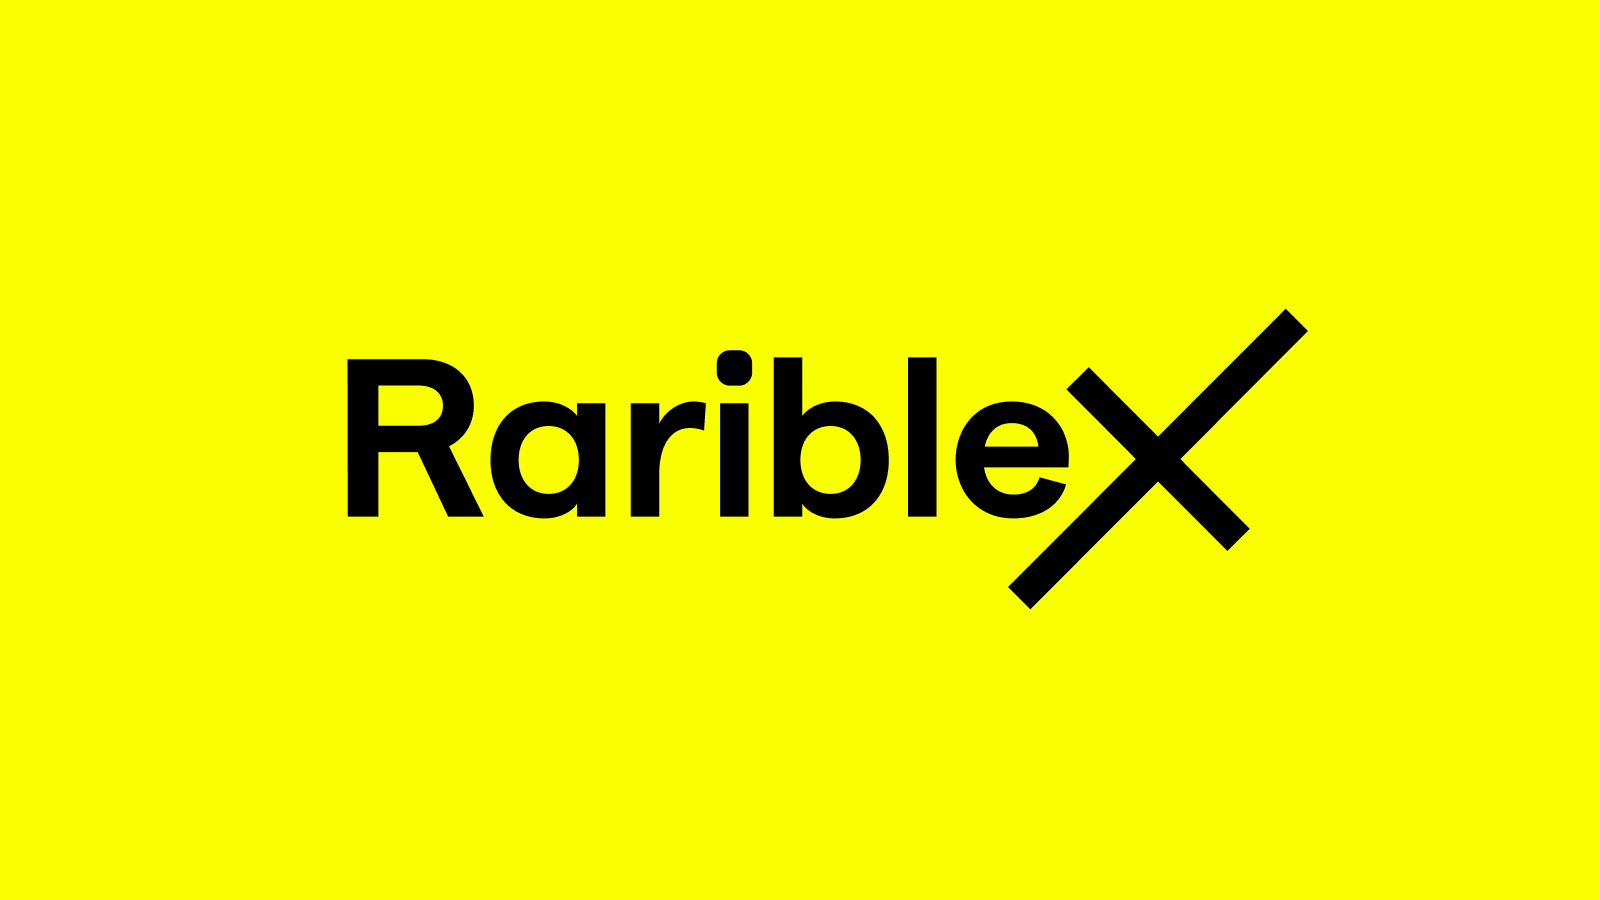 Introducing RaribleX, the turnkey marketplace solution